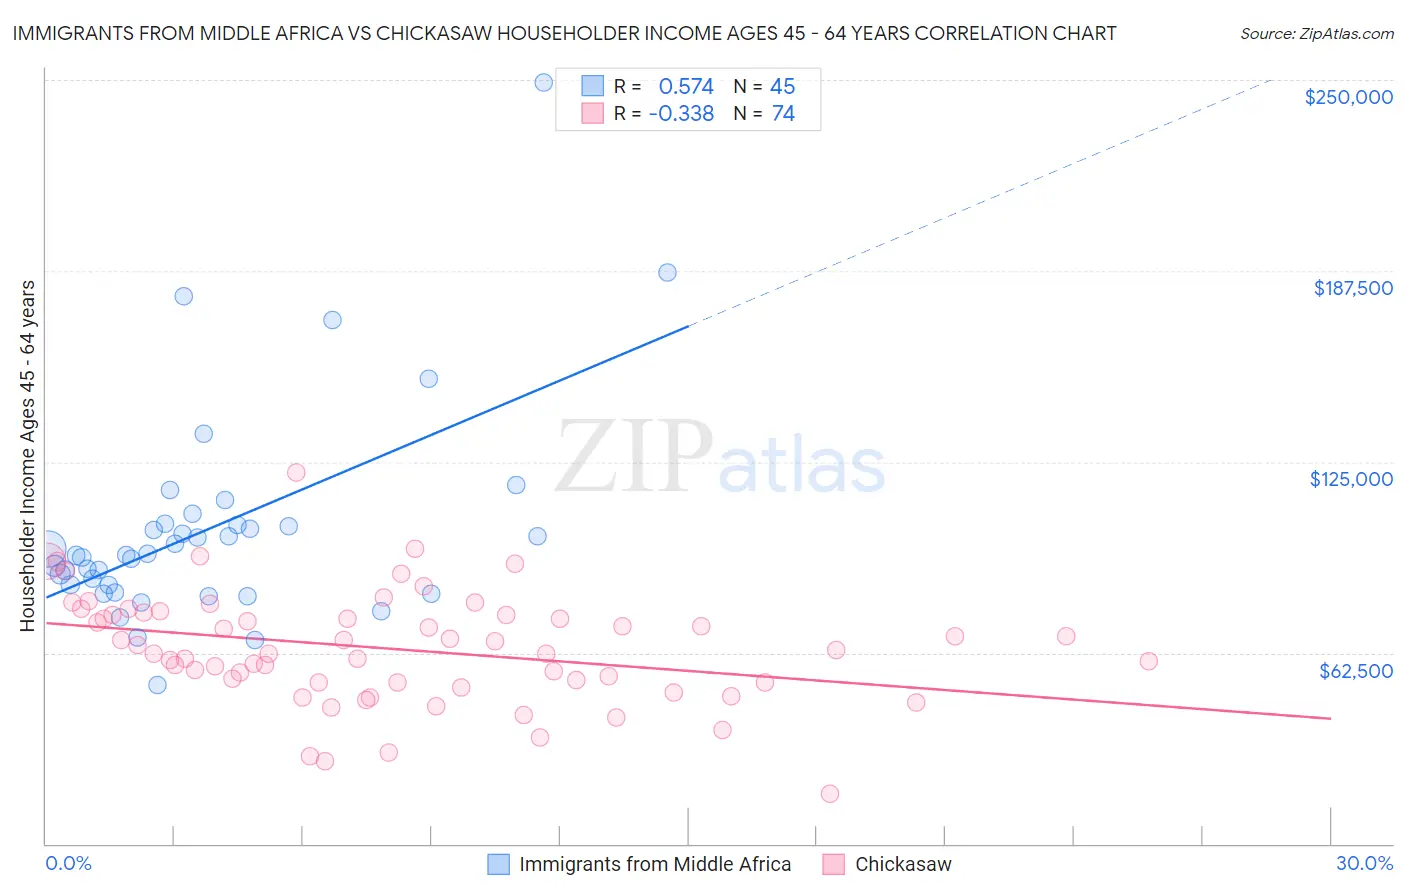 Immigrants from Middle Africa vs Chickasaw Householder Income Ages 45 - 64 years